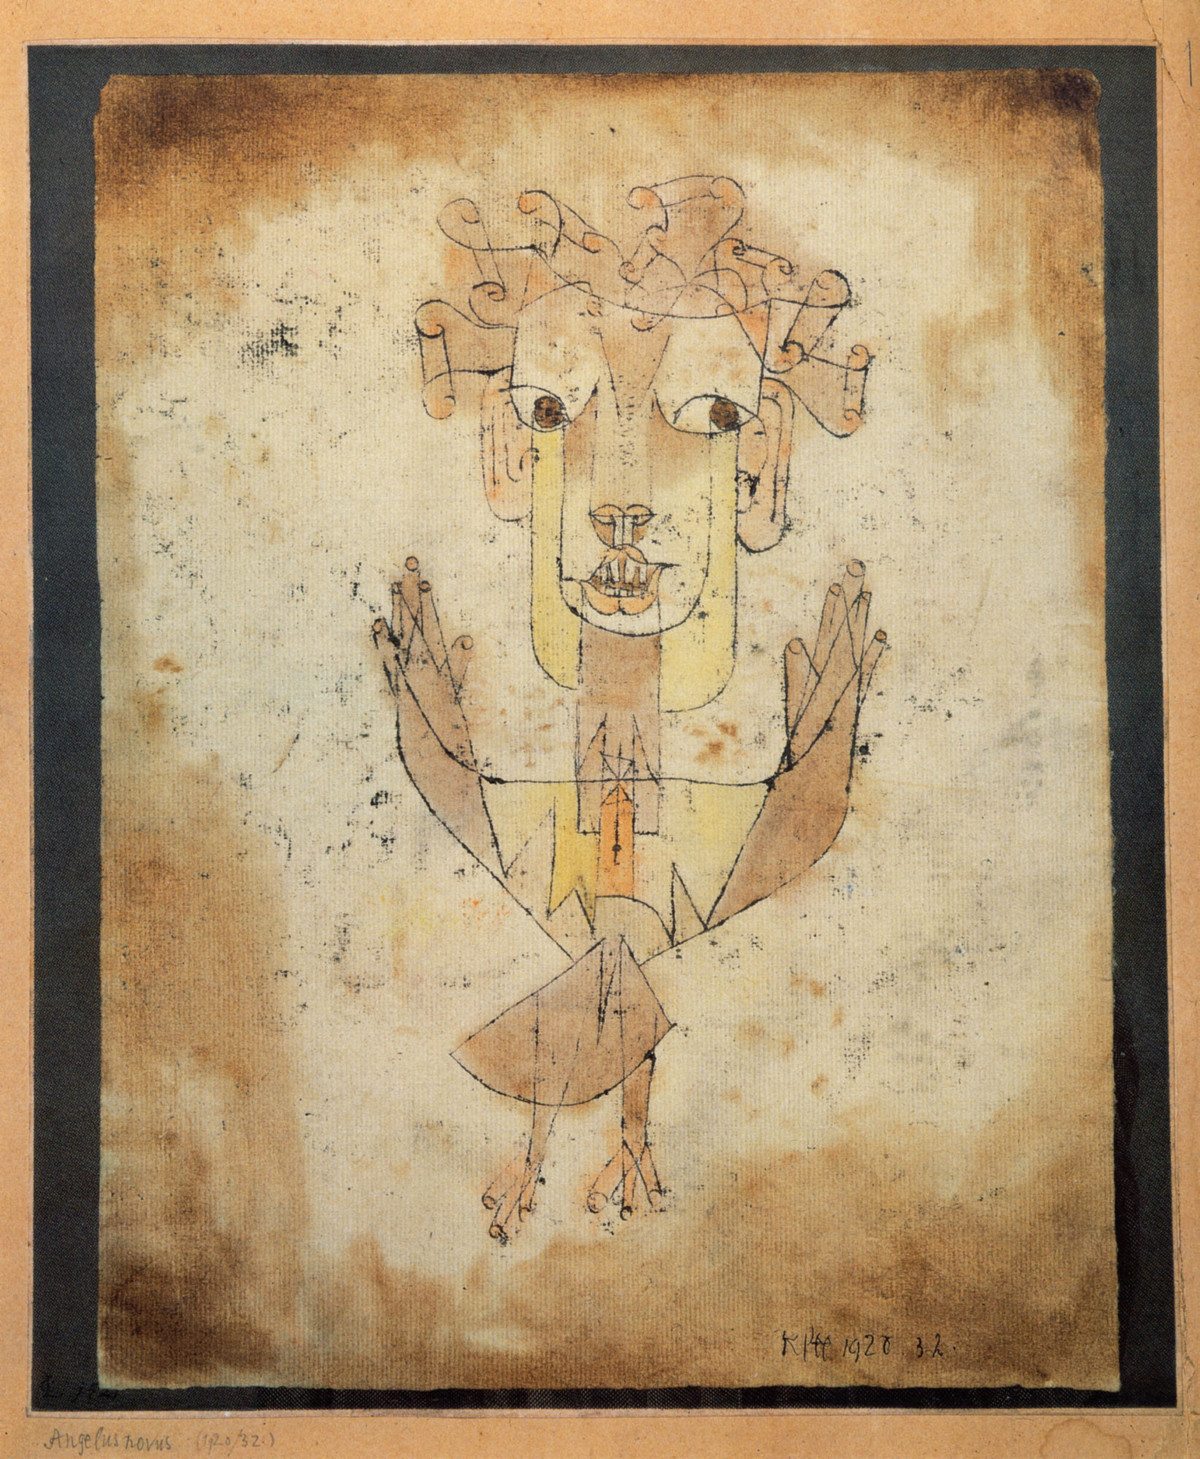 Angelus Novus, 1920, by Paul Klee. From the collection of Israel Museum, Jerusalem.